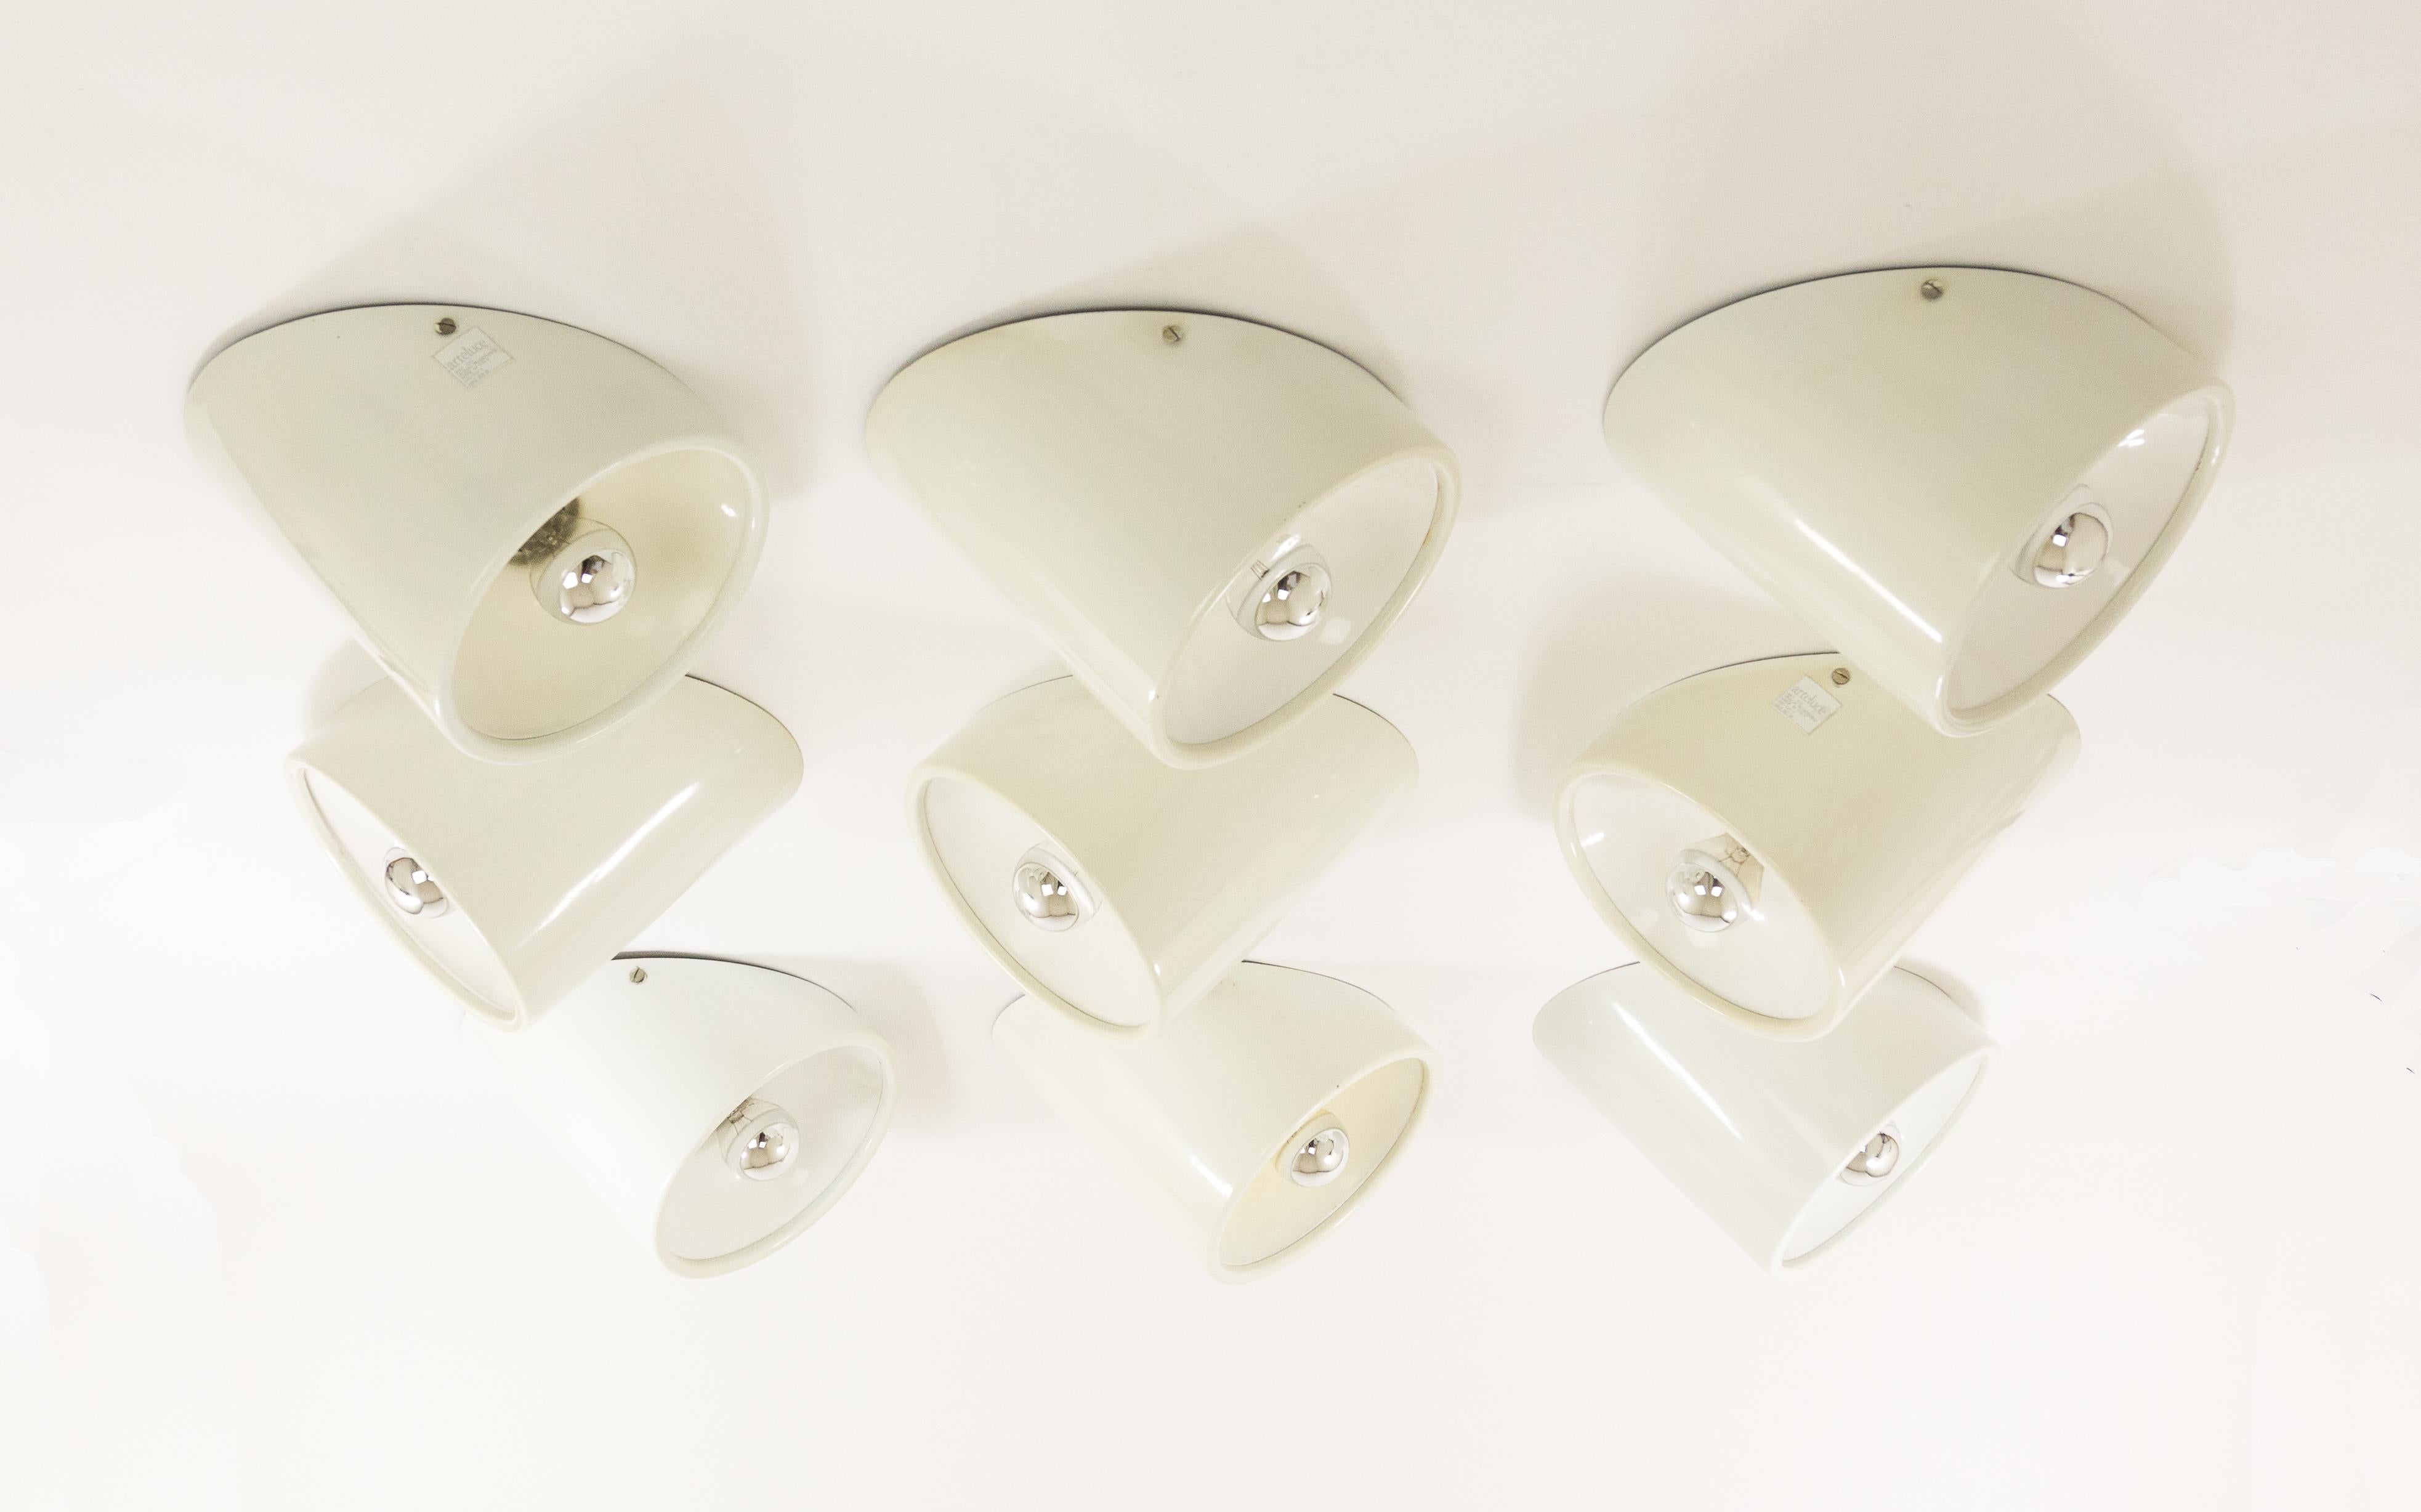 Set of 9 wall or ceiling fixtures, No. 235/b, designed by architect Cini Boeri and manufactured by Arteluce in 1971.

Each lamp consists of two parts: the cylindrical outside and the inside (a reflector). Both parts are (off-)white lacquered. The